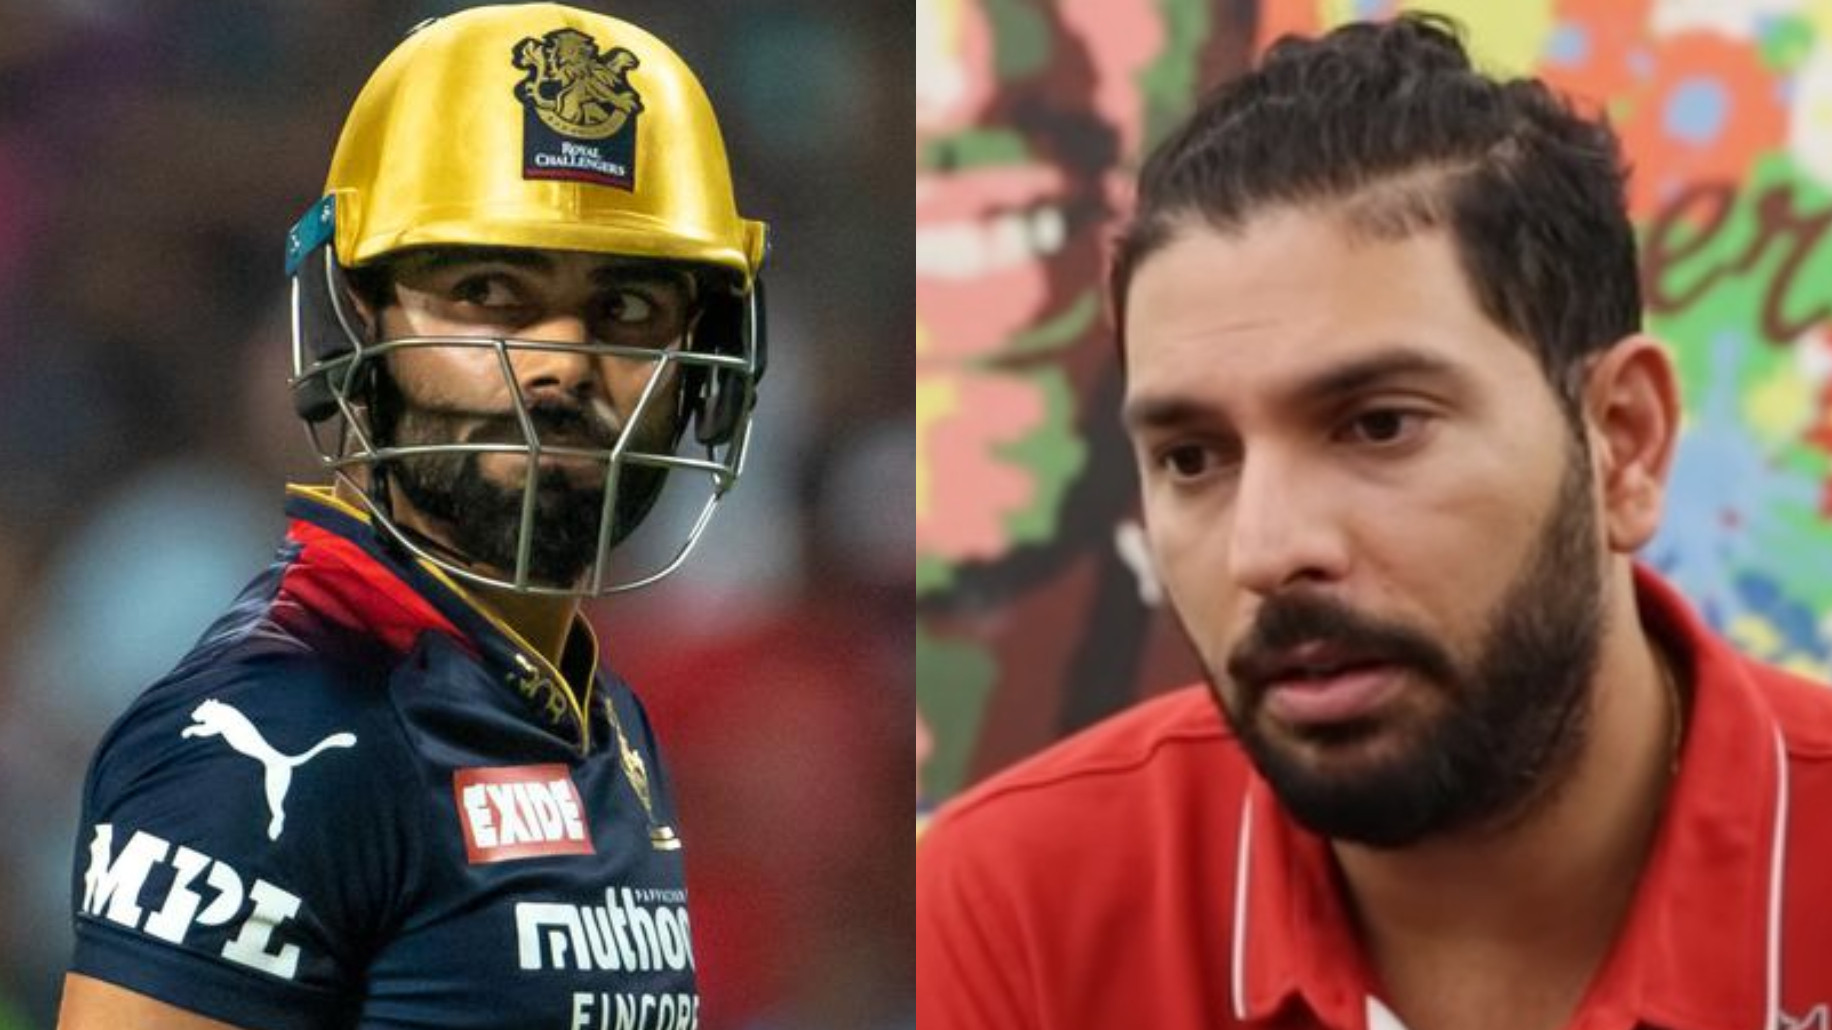 IPL 2022: Virat Kohli needs to go back to being the free-flowing person he was- Yuvraj Singh